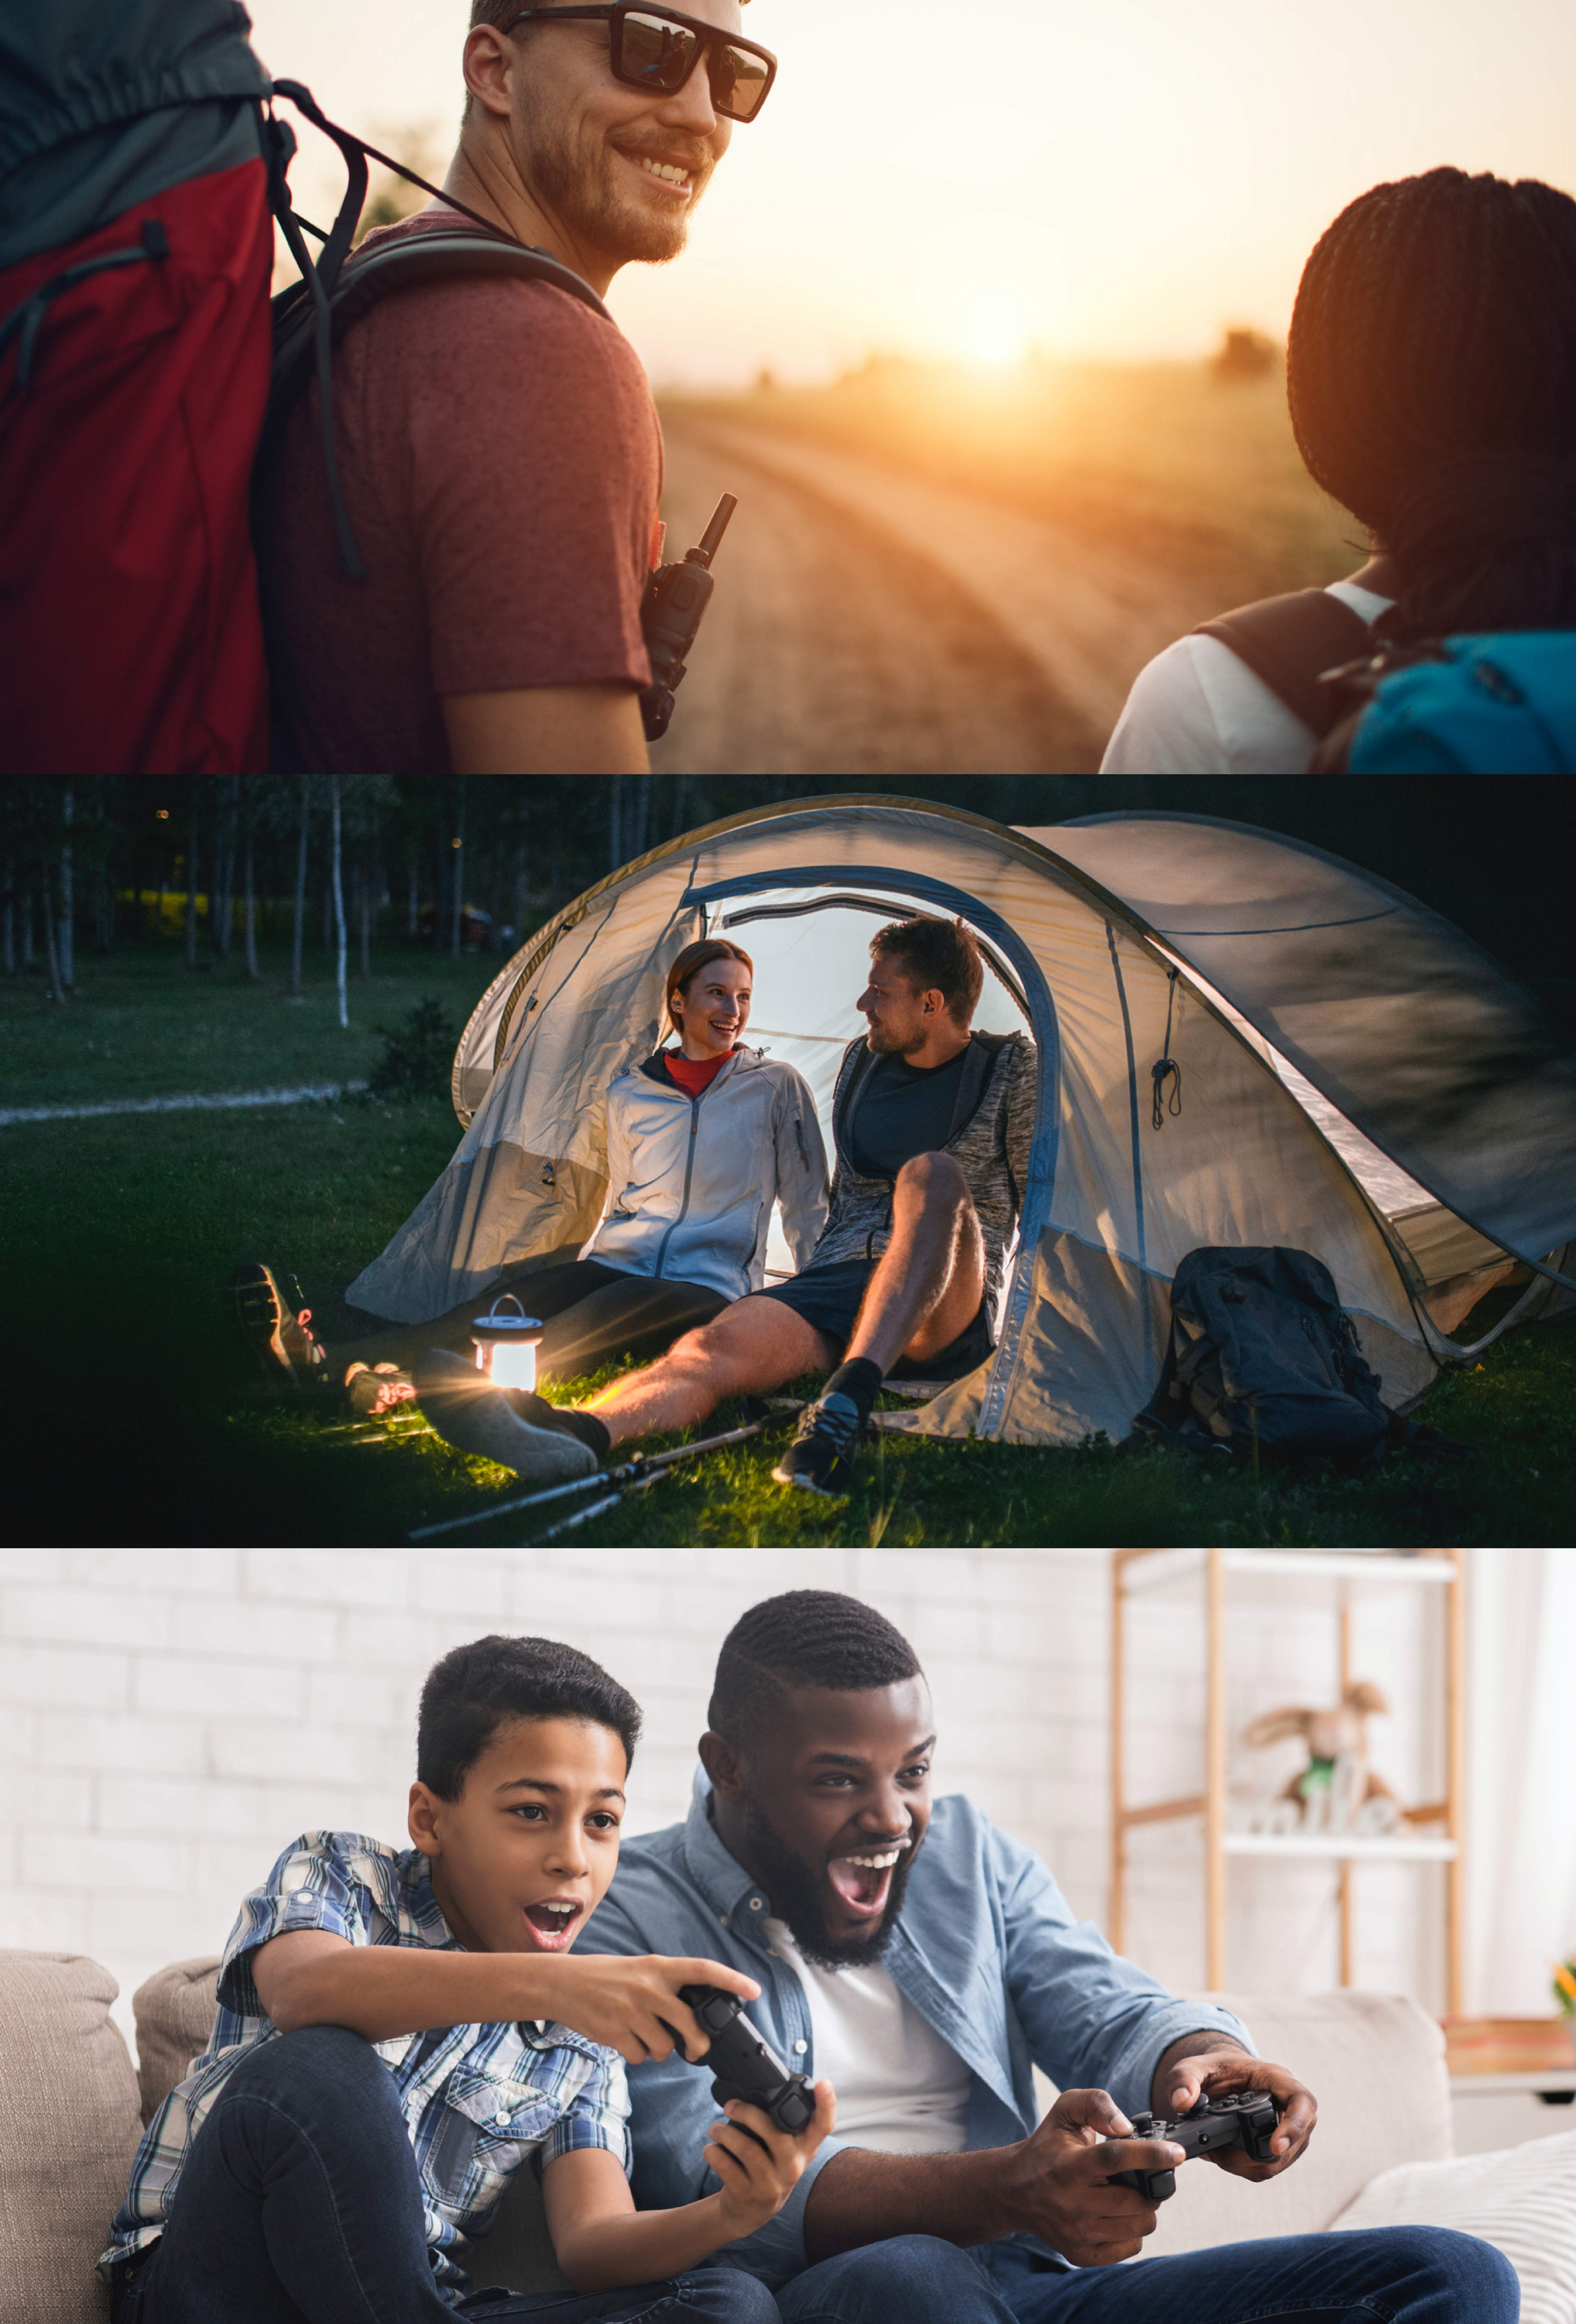 Background picture showing a man with sunglasses and wearing a backpack, a Caucasian couple camping and African American father and son playing videogames